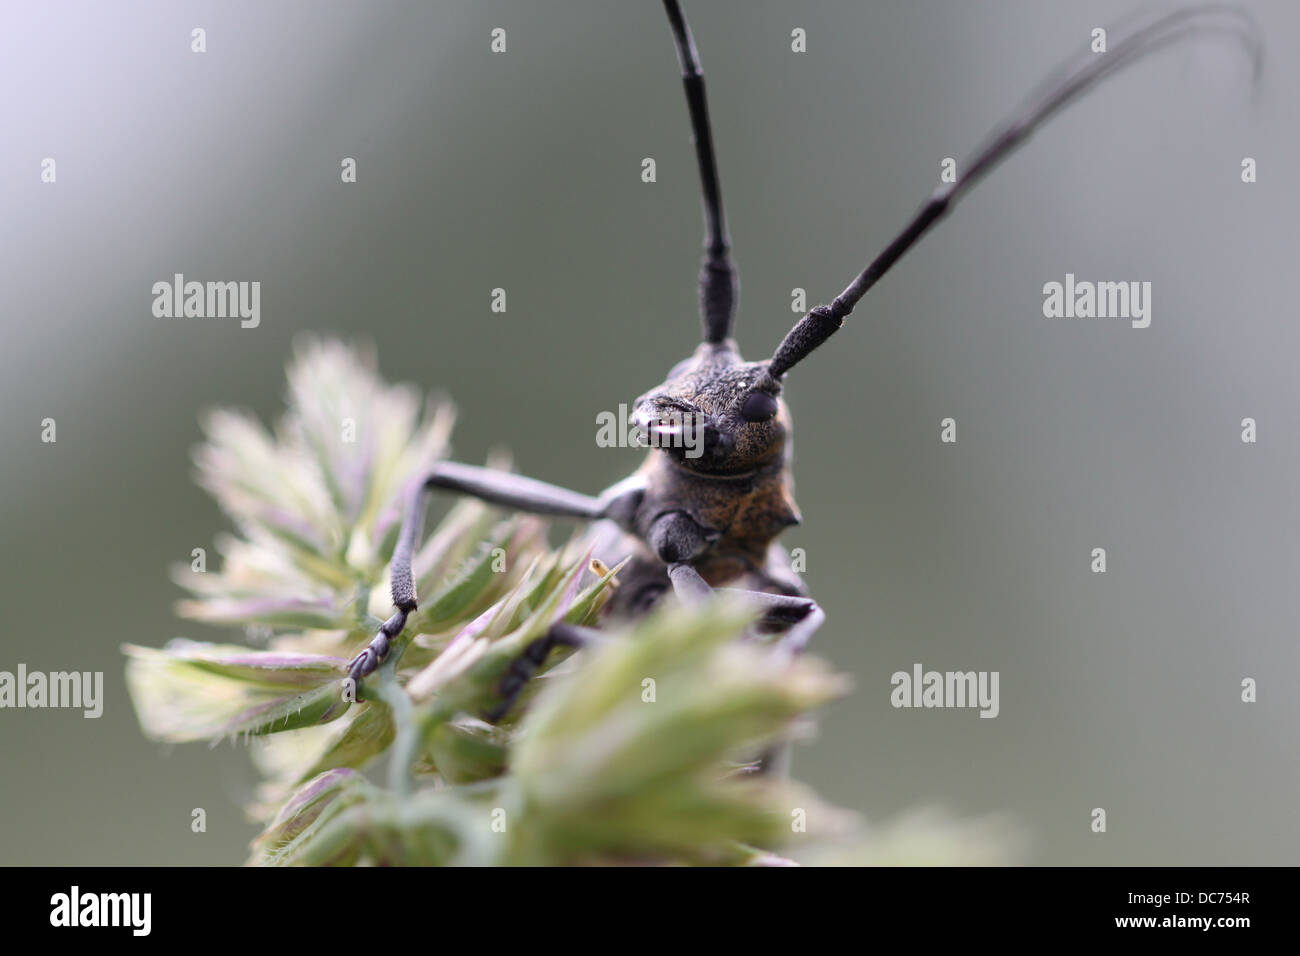 long-horned beetle closeup under natural conditions Stock Photo